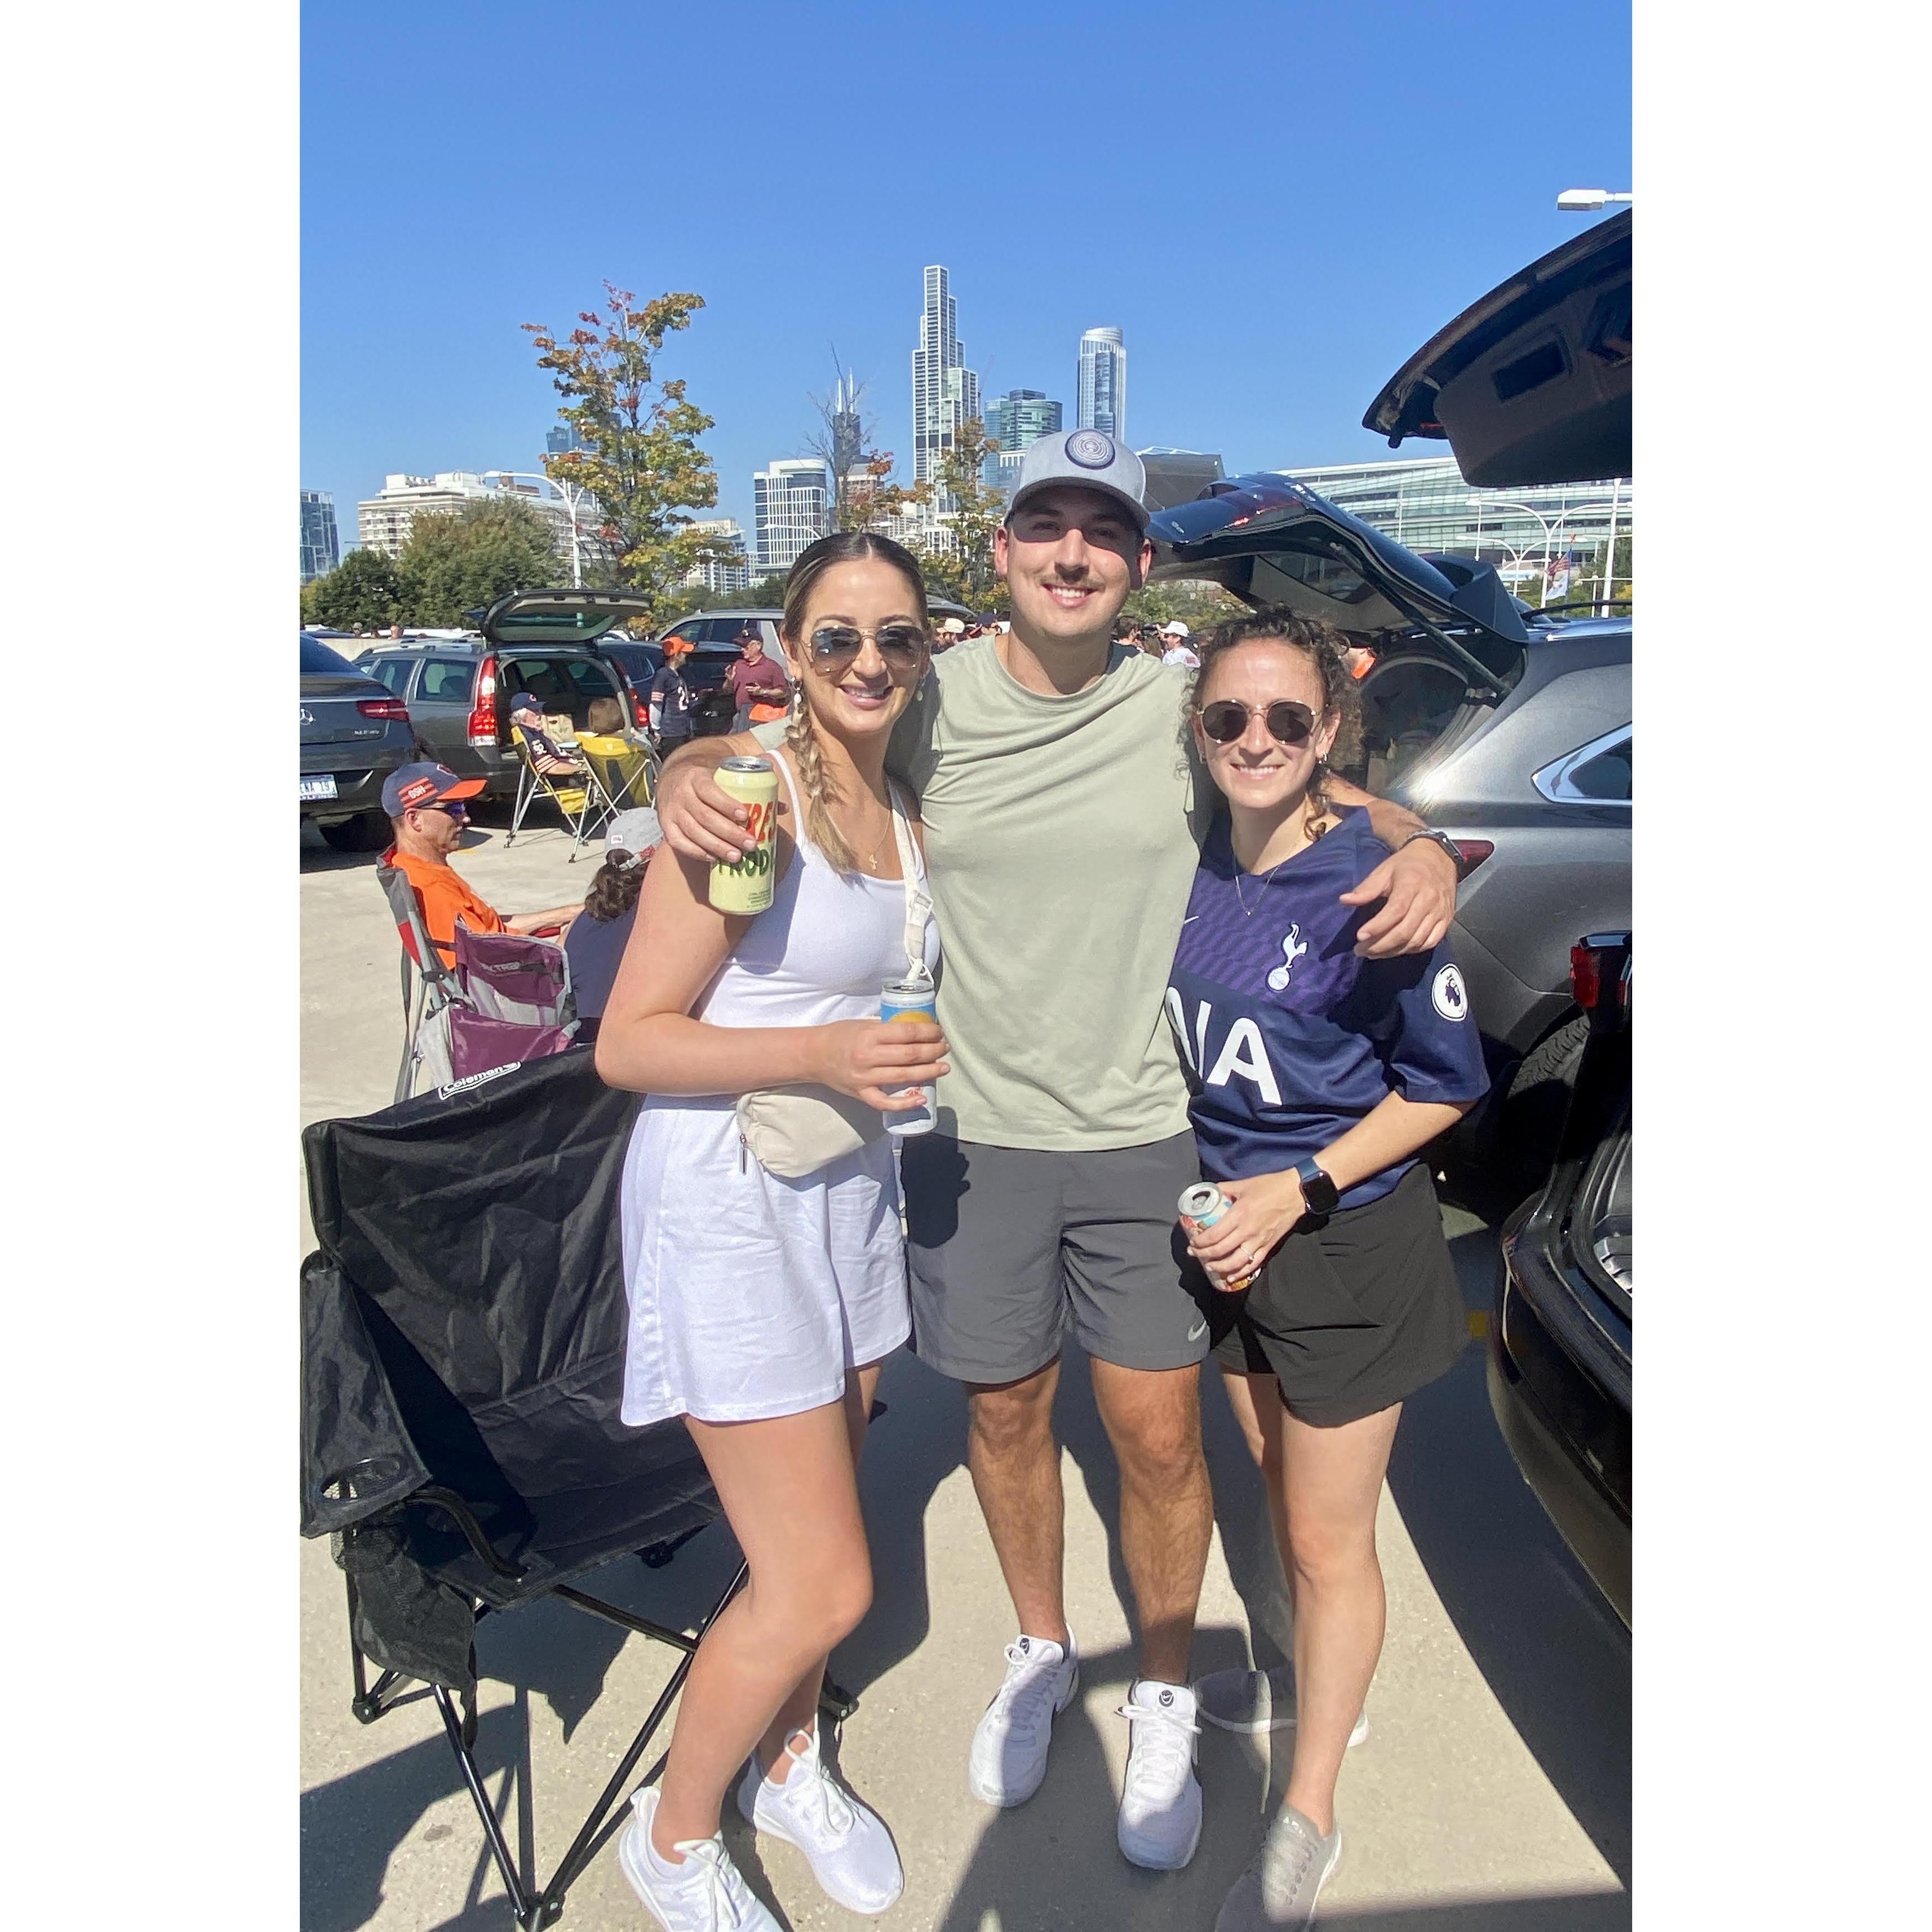 Lindsey, Trevor, and Chloe at the Chicago Bears vs Broncos